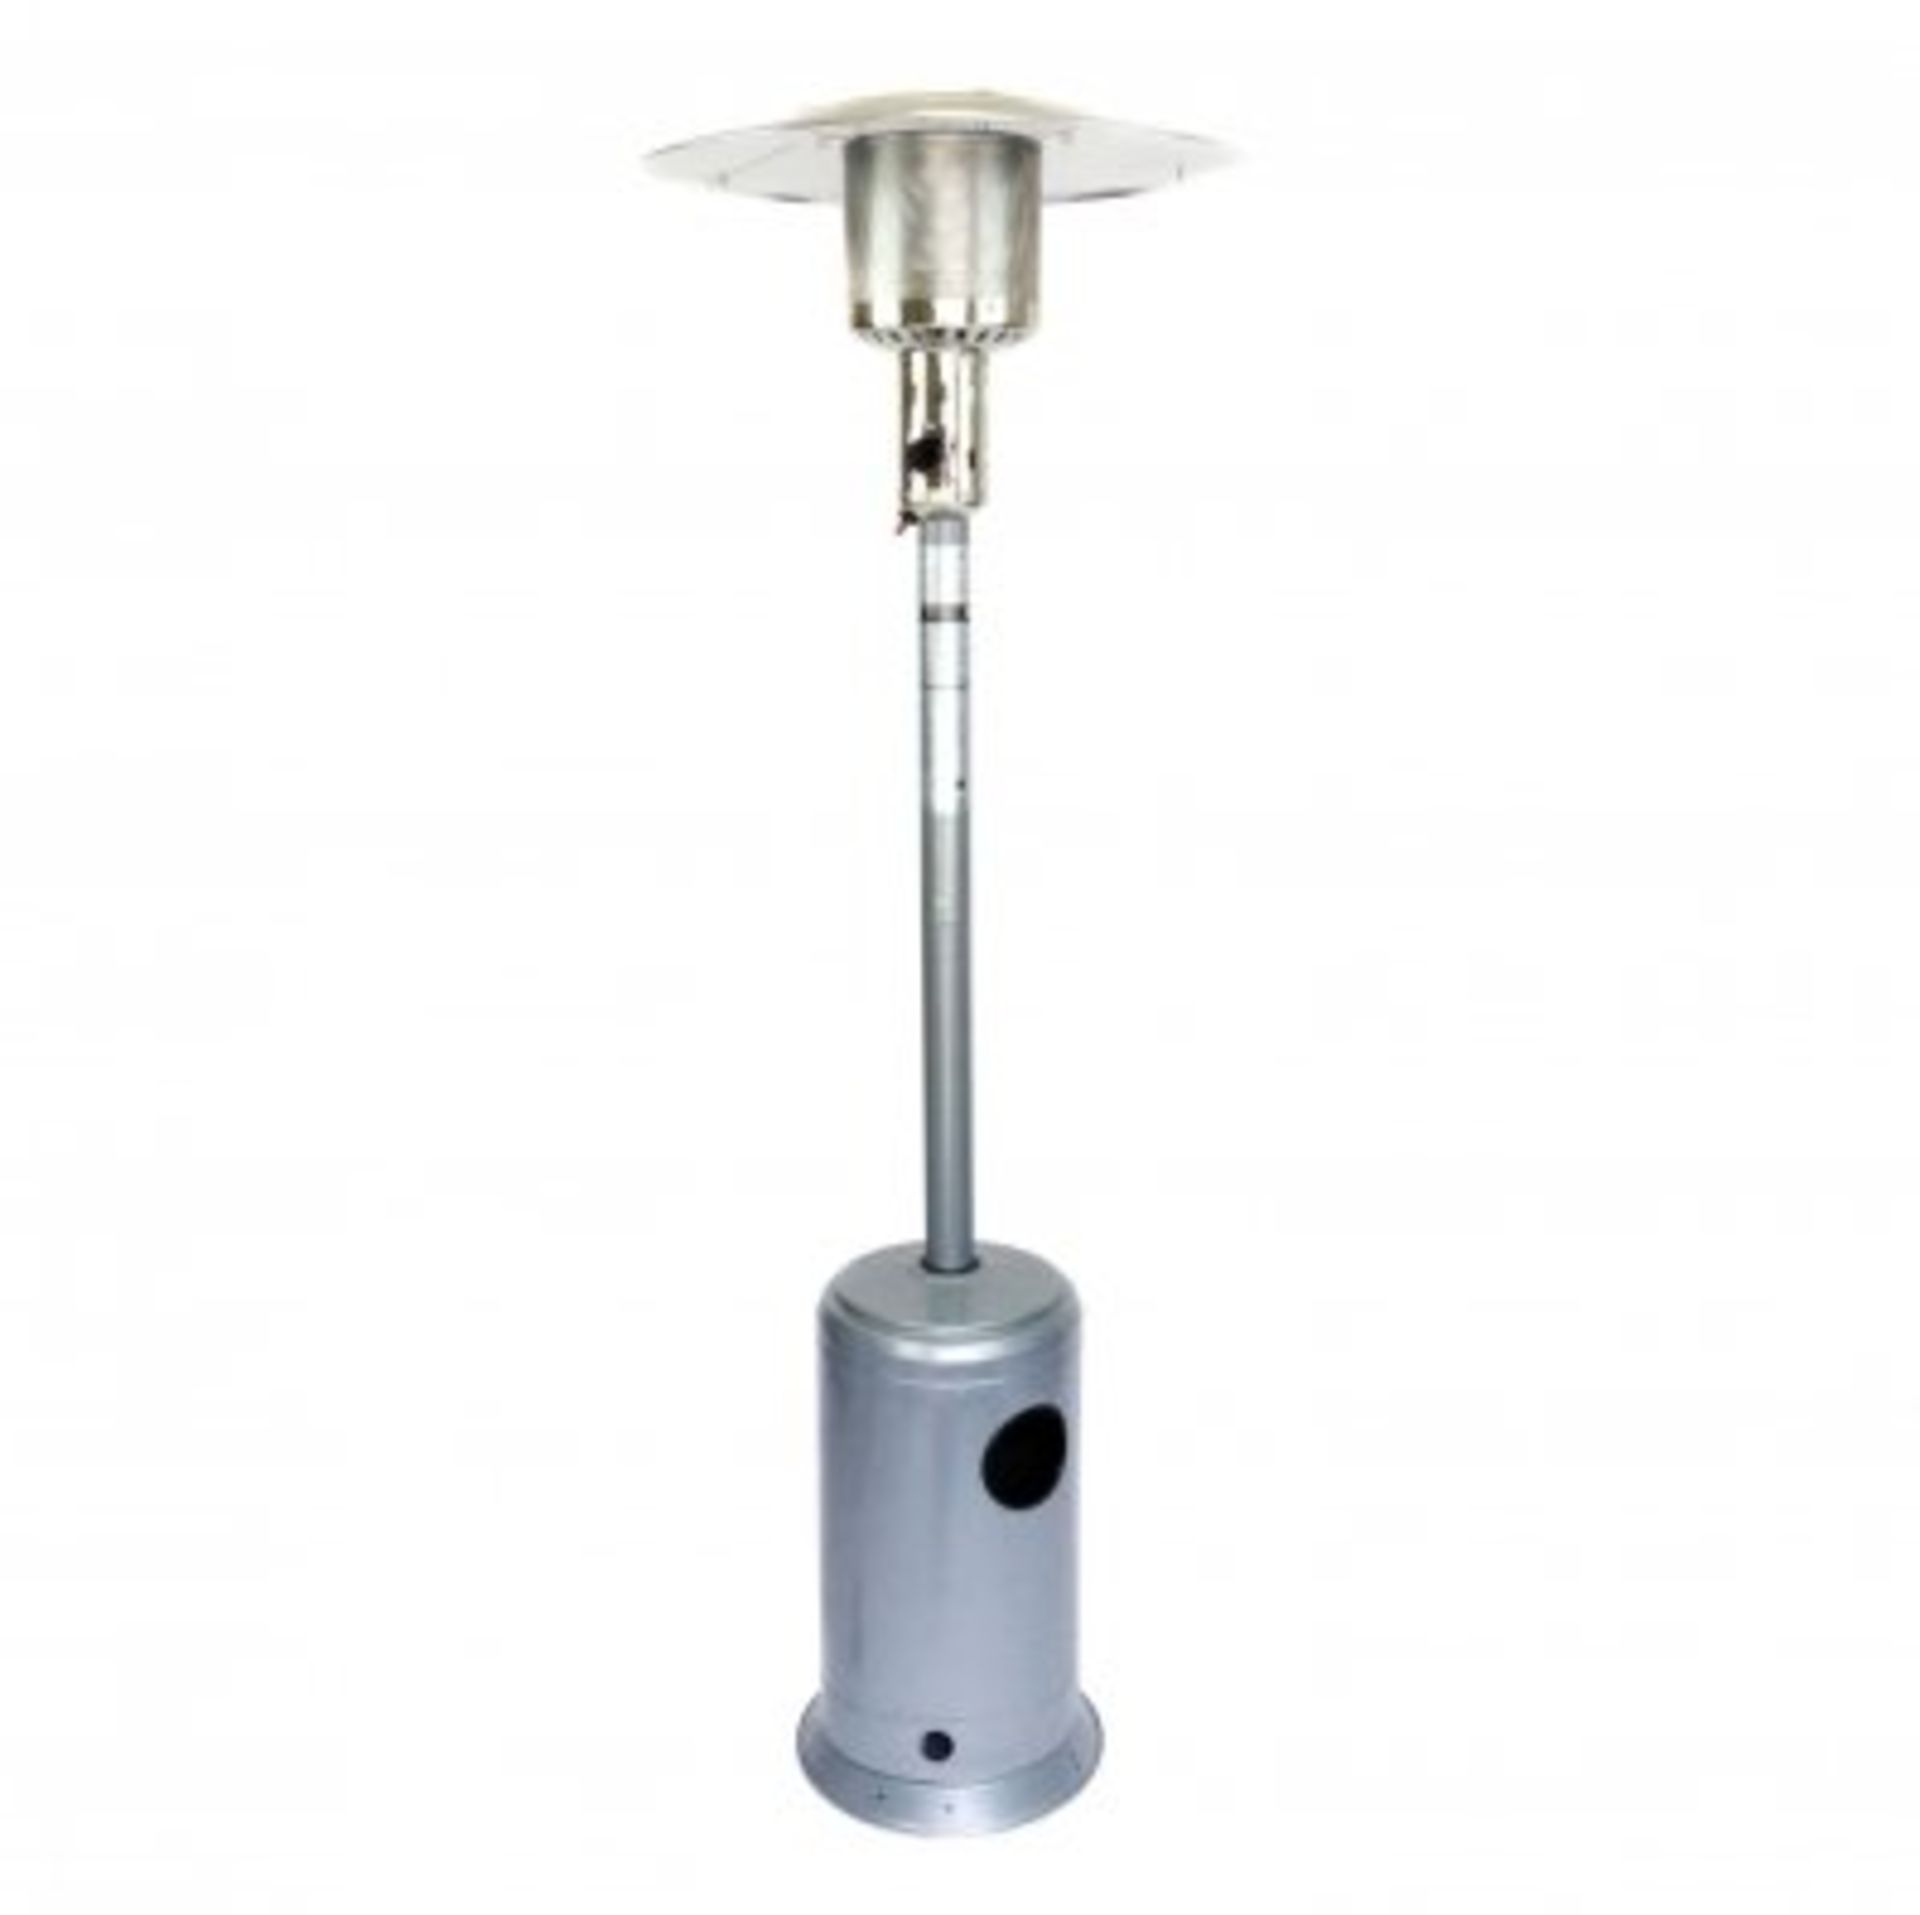 (PP91) Free Standing 12KW Outdoor Gas Patio Heater c/w Hose & Regulator One of the most powe...